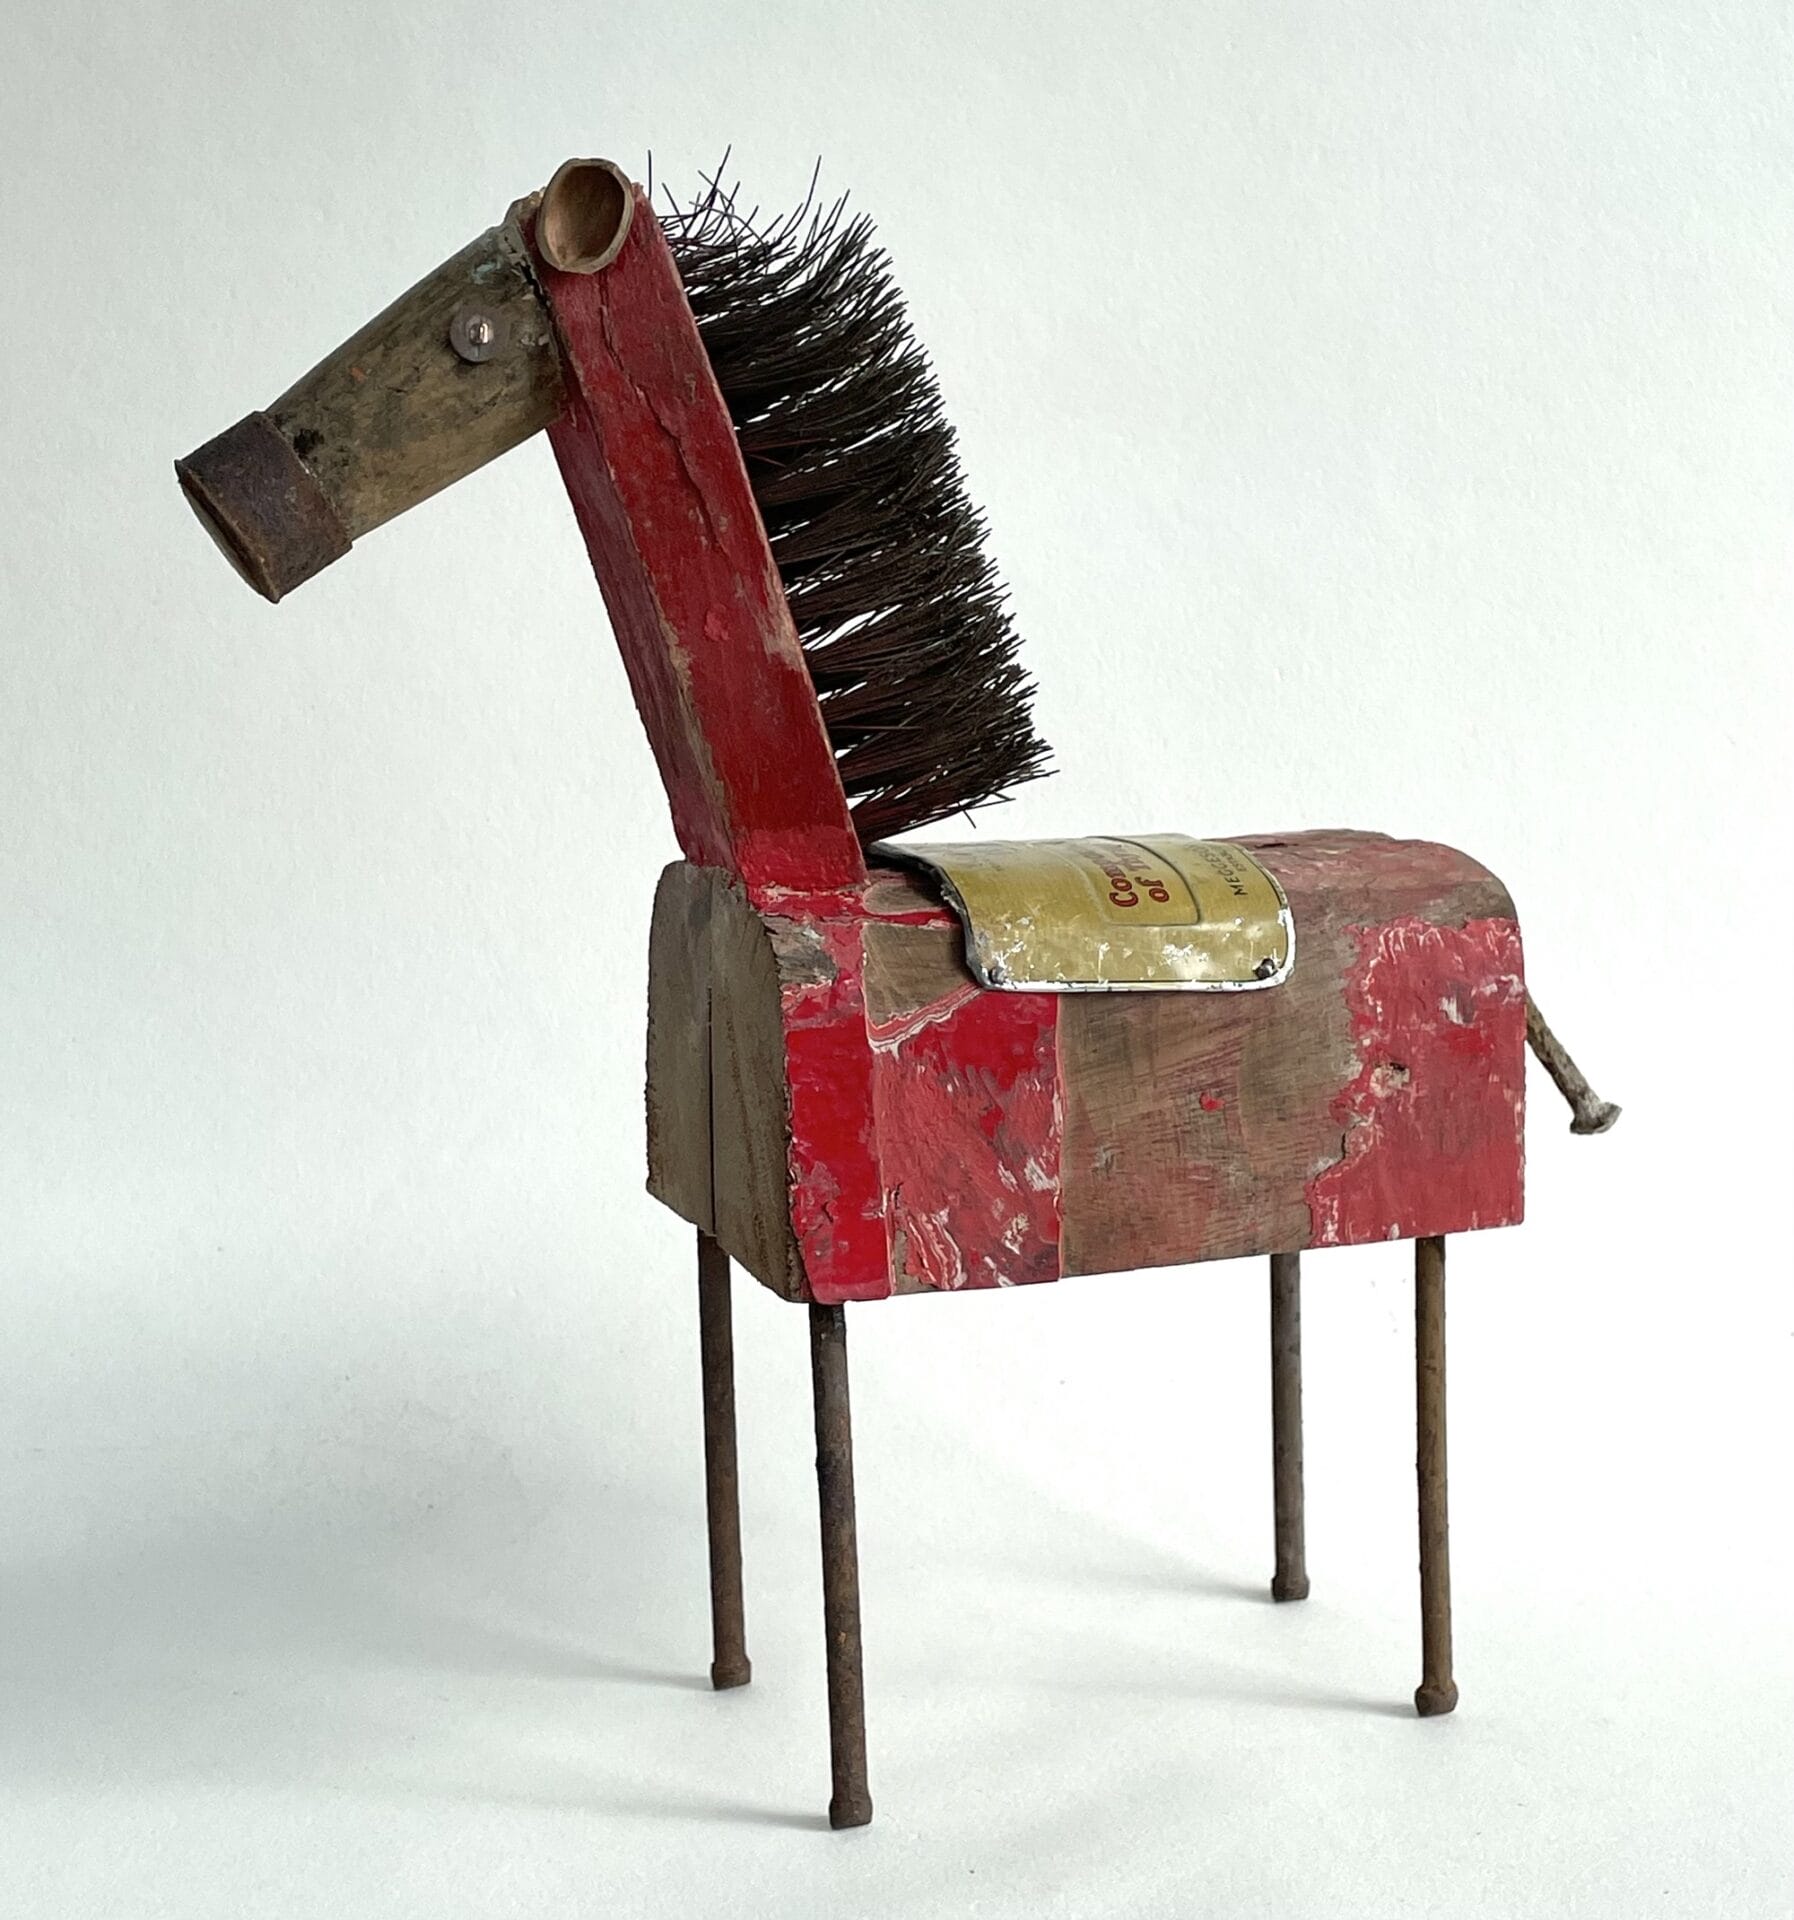 a sculpture of a horse made from an old brush and repurposed wood and nails